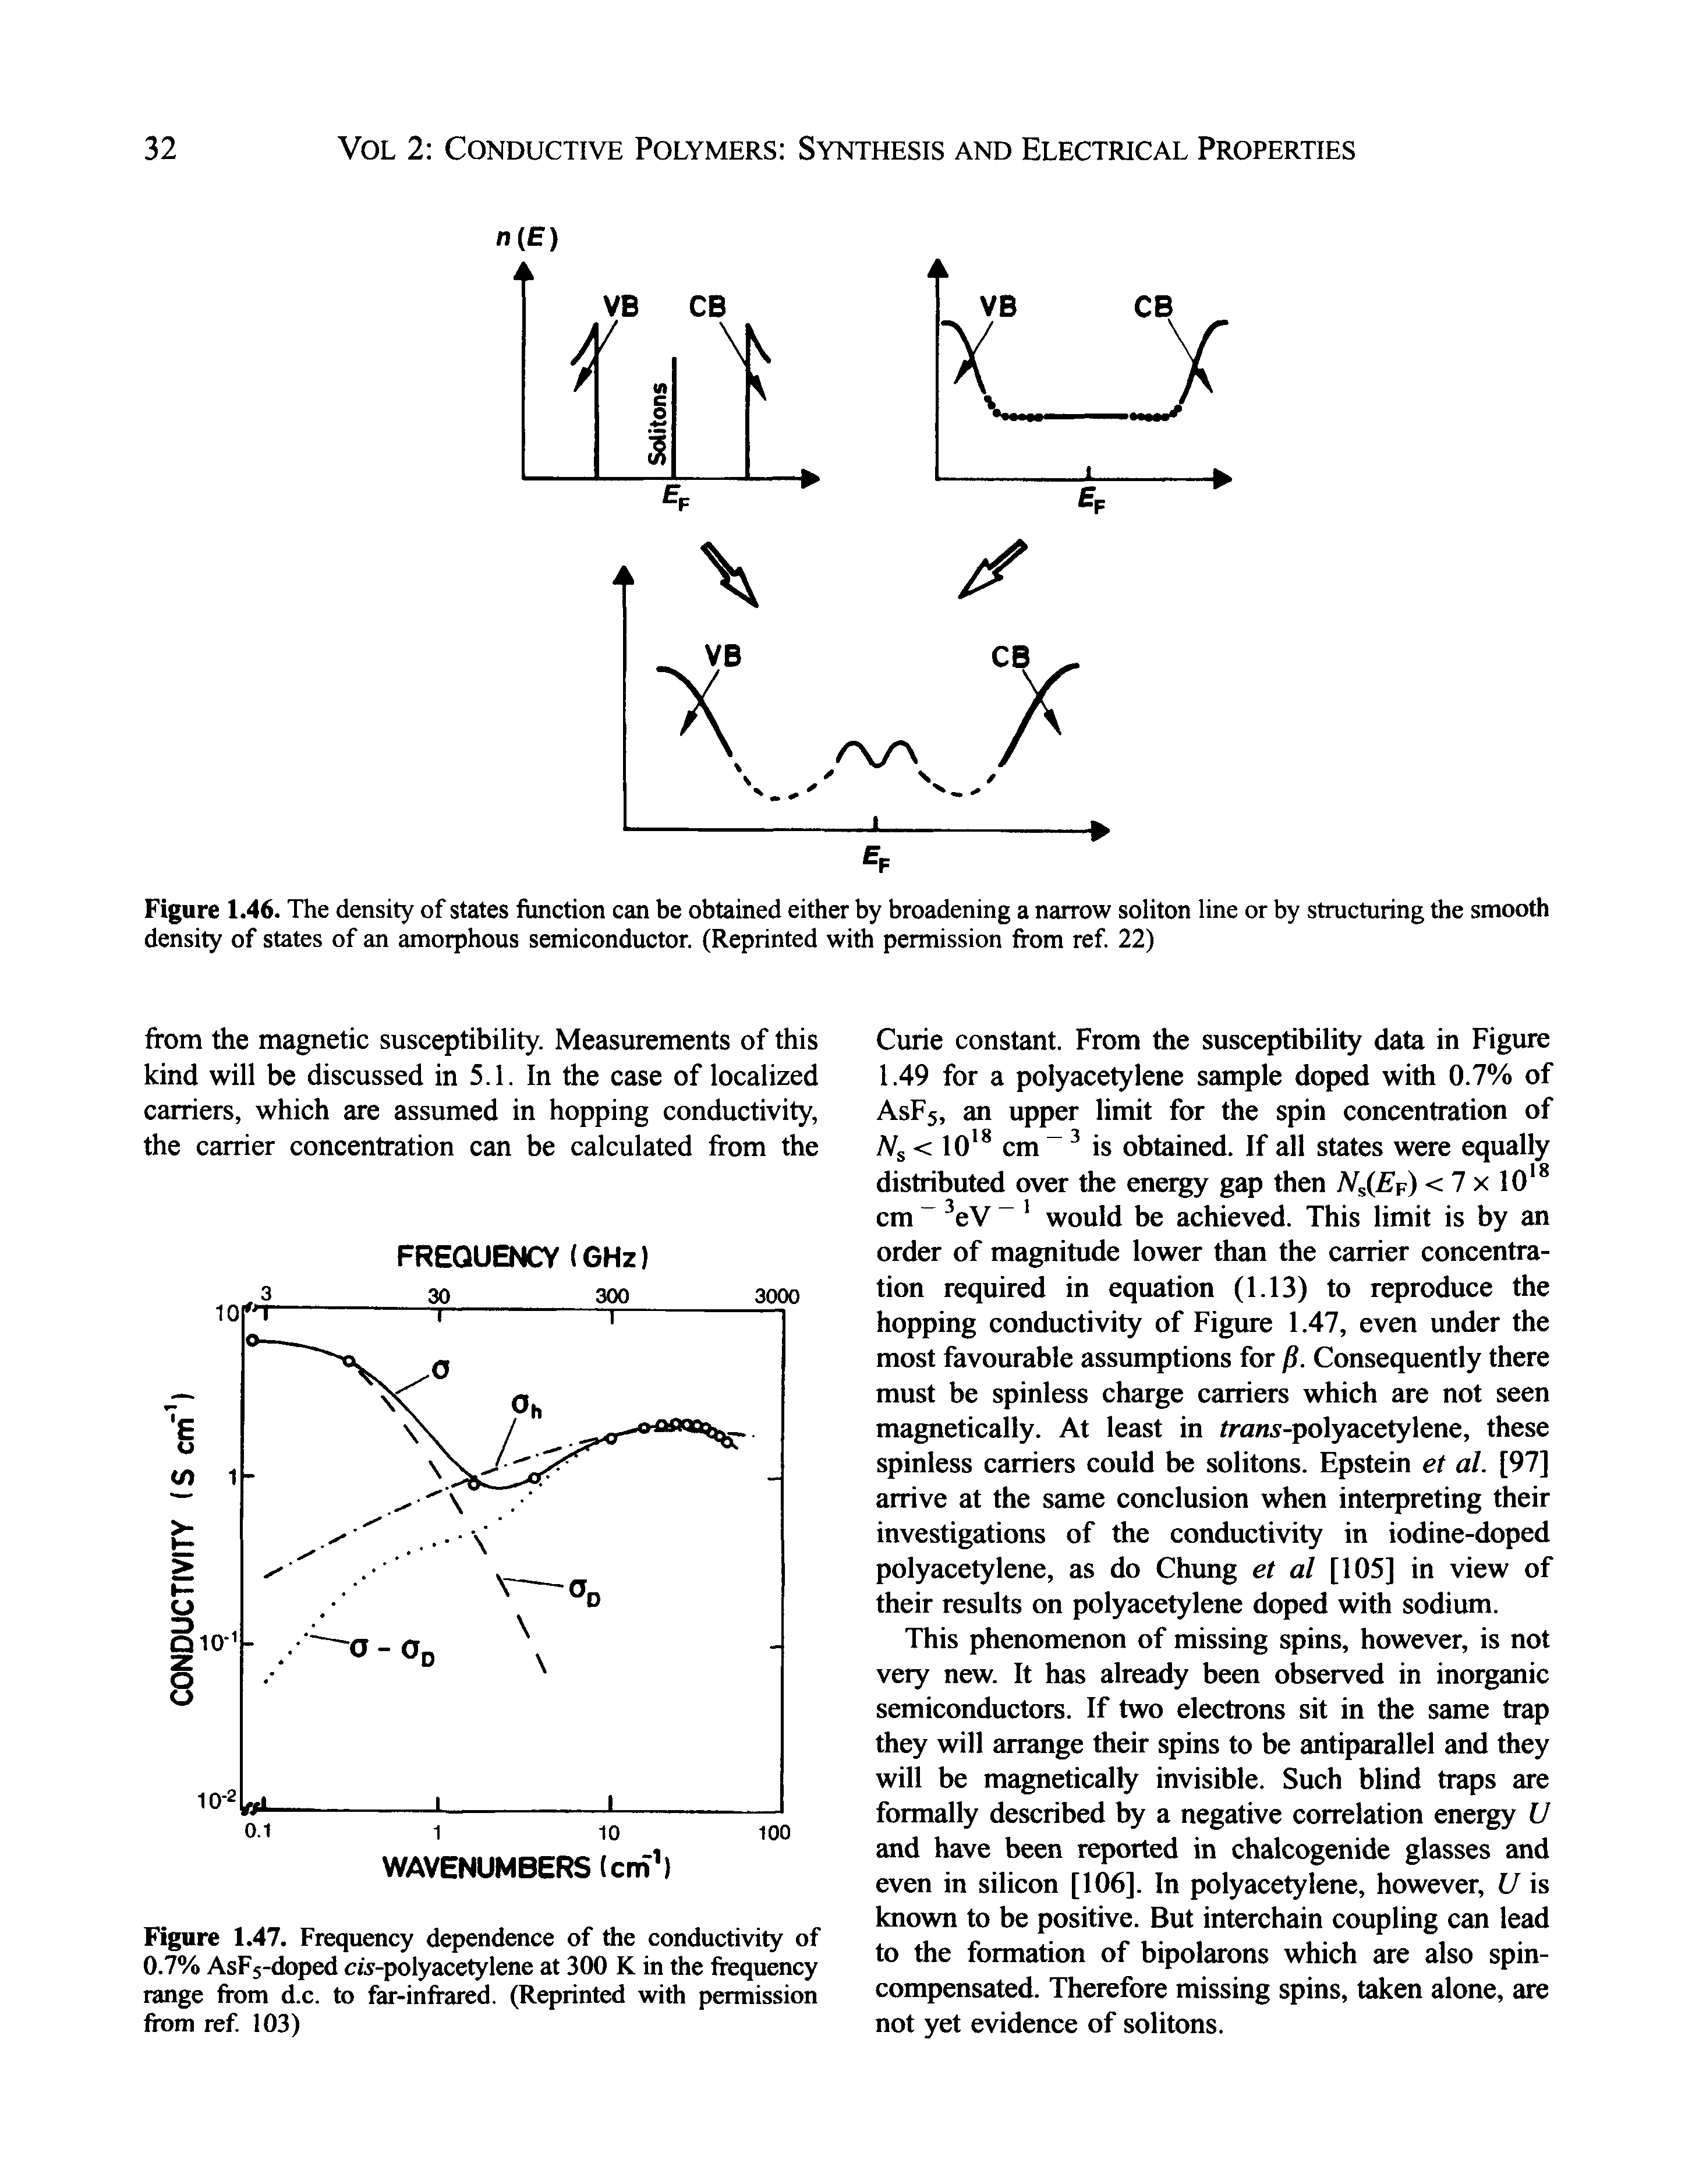 Figure 1.47. Frequency dependence of the conductivity of 0.7% AsFs-doped cw-polyacetylene at 300 K in the frequency range from d.c. to far-infrared. (Reprinted with permission from ref 103)...